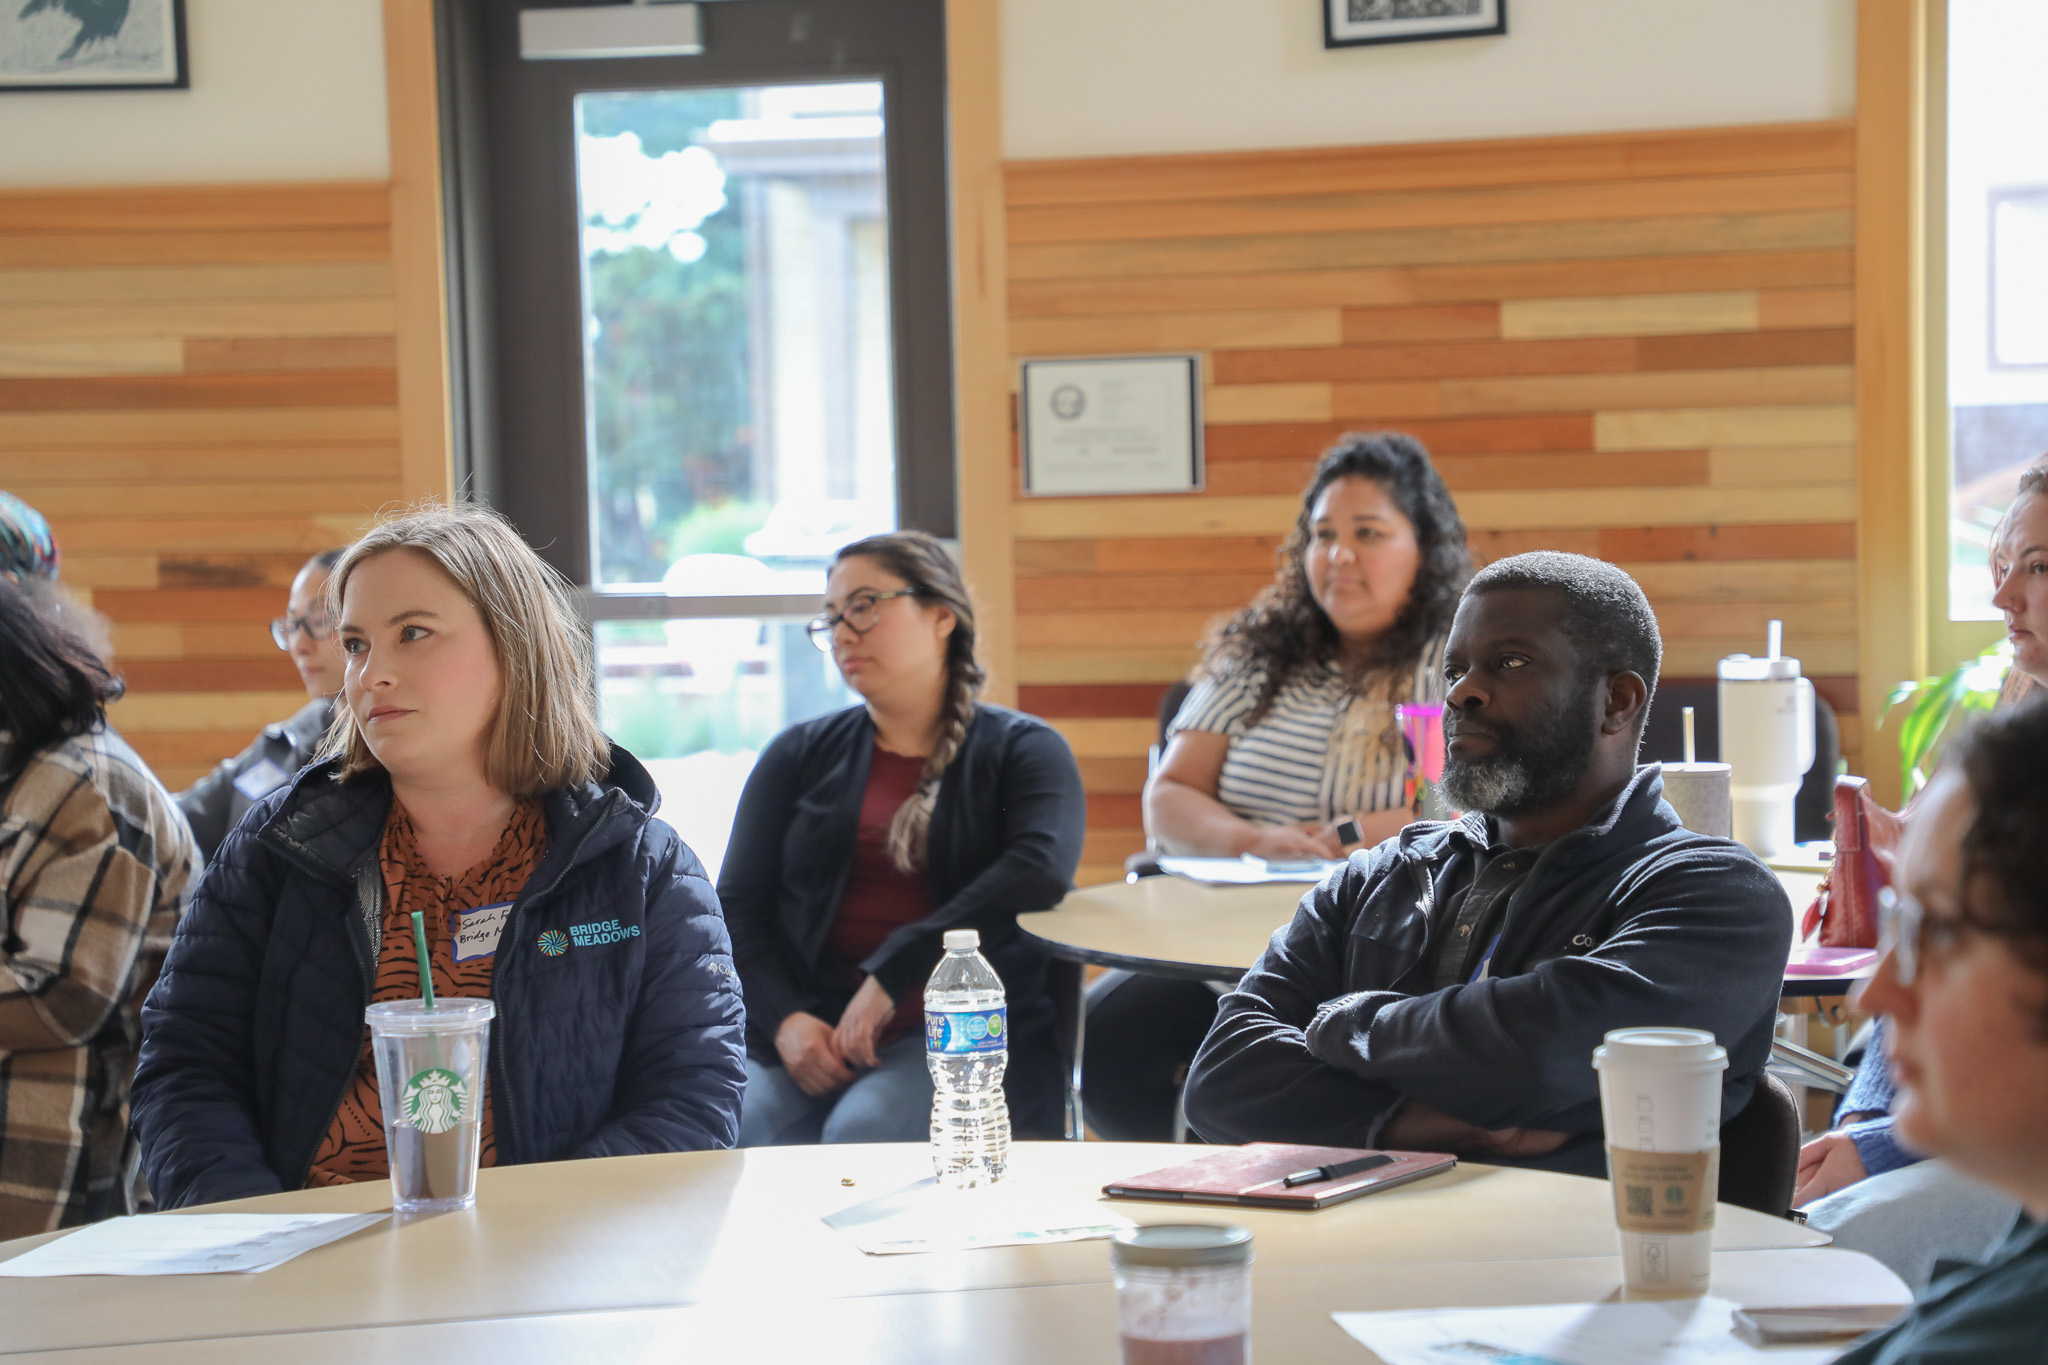 Photo of people seated at round tables listening to the presenters at a training session for staff who work at PCL grantee partner organizations.